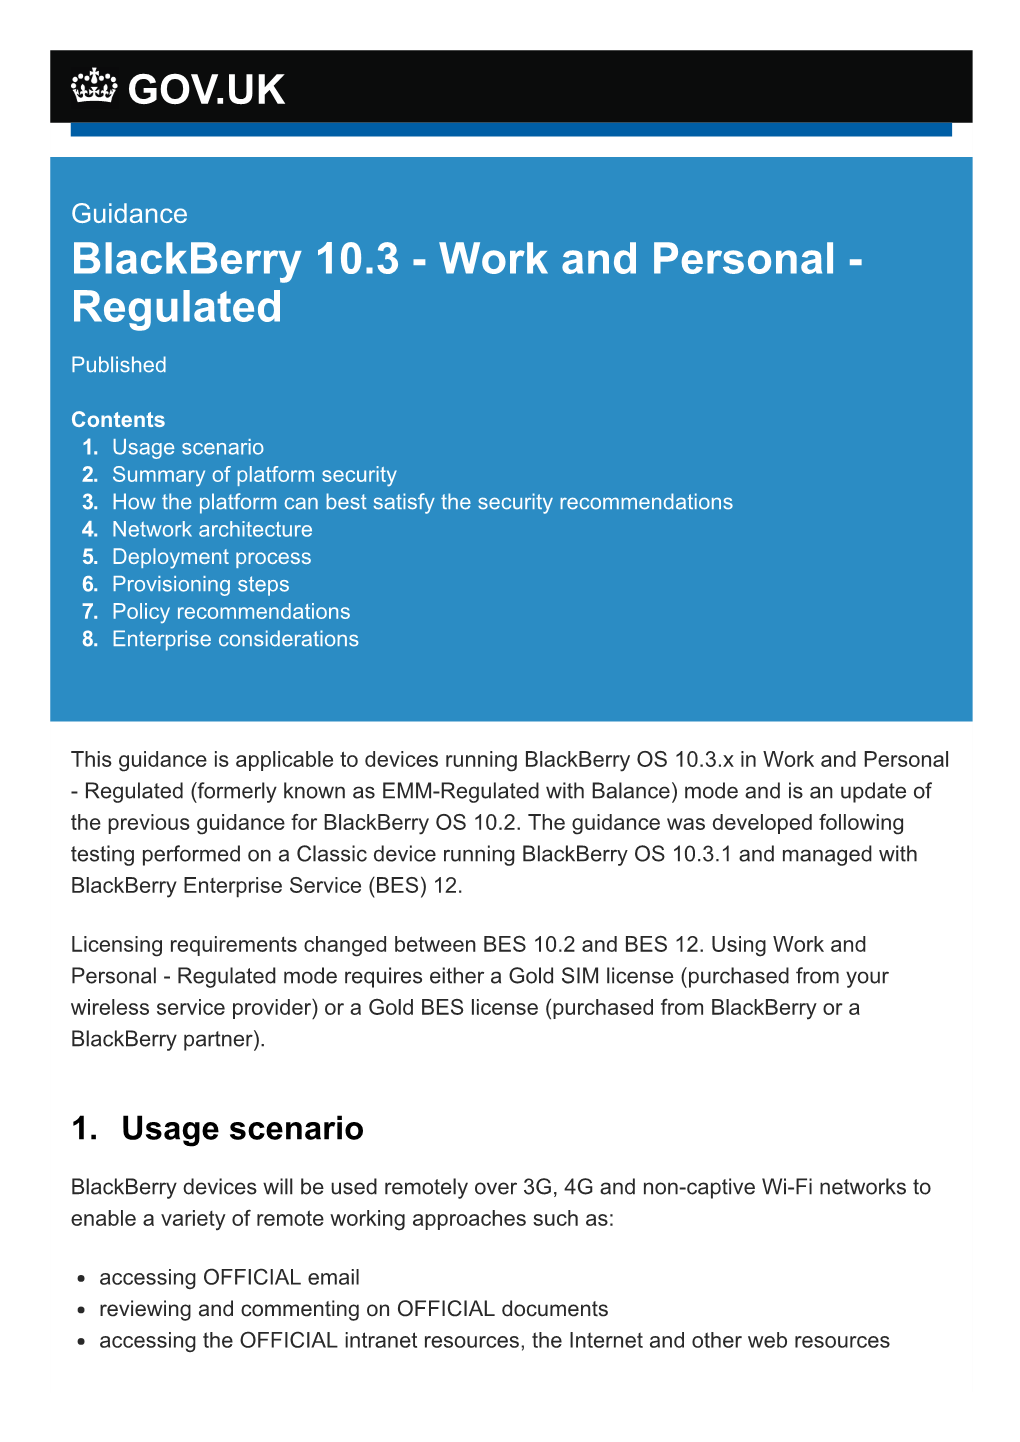 Blackberry 10.3 Work and Personal Regulated